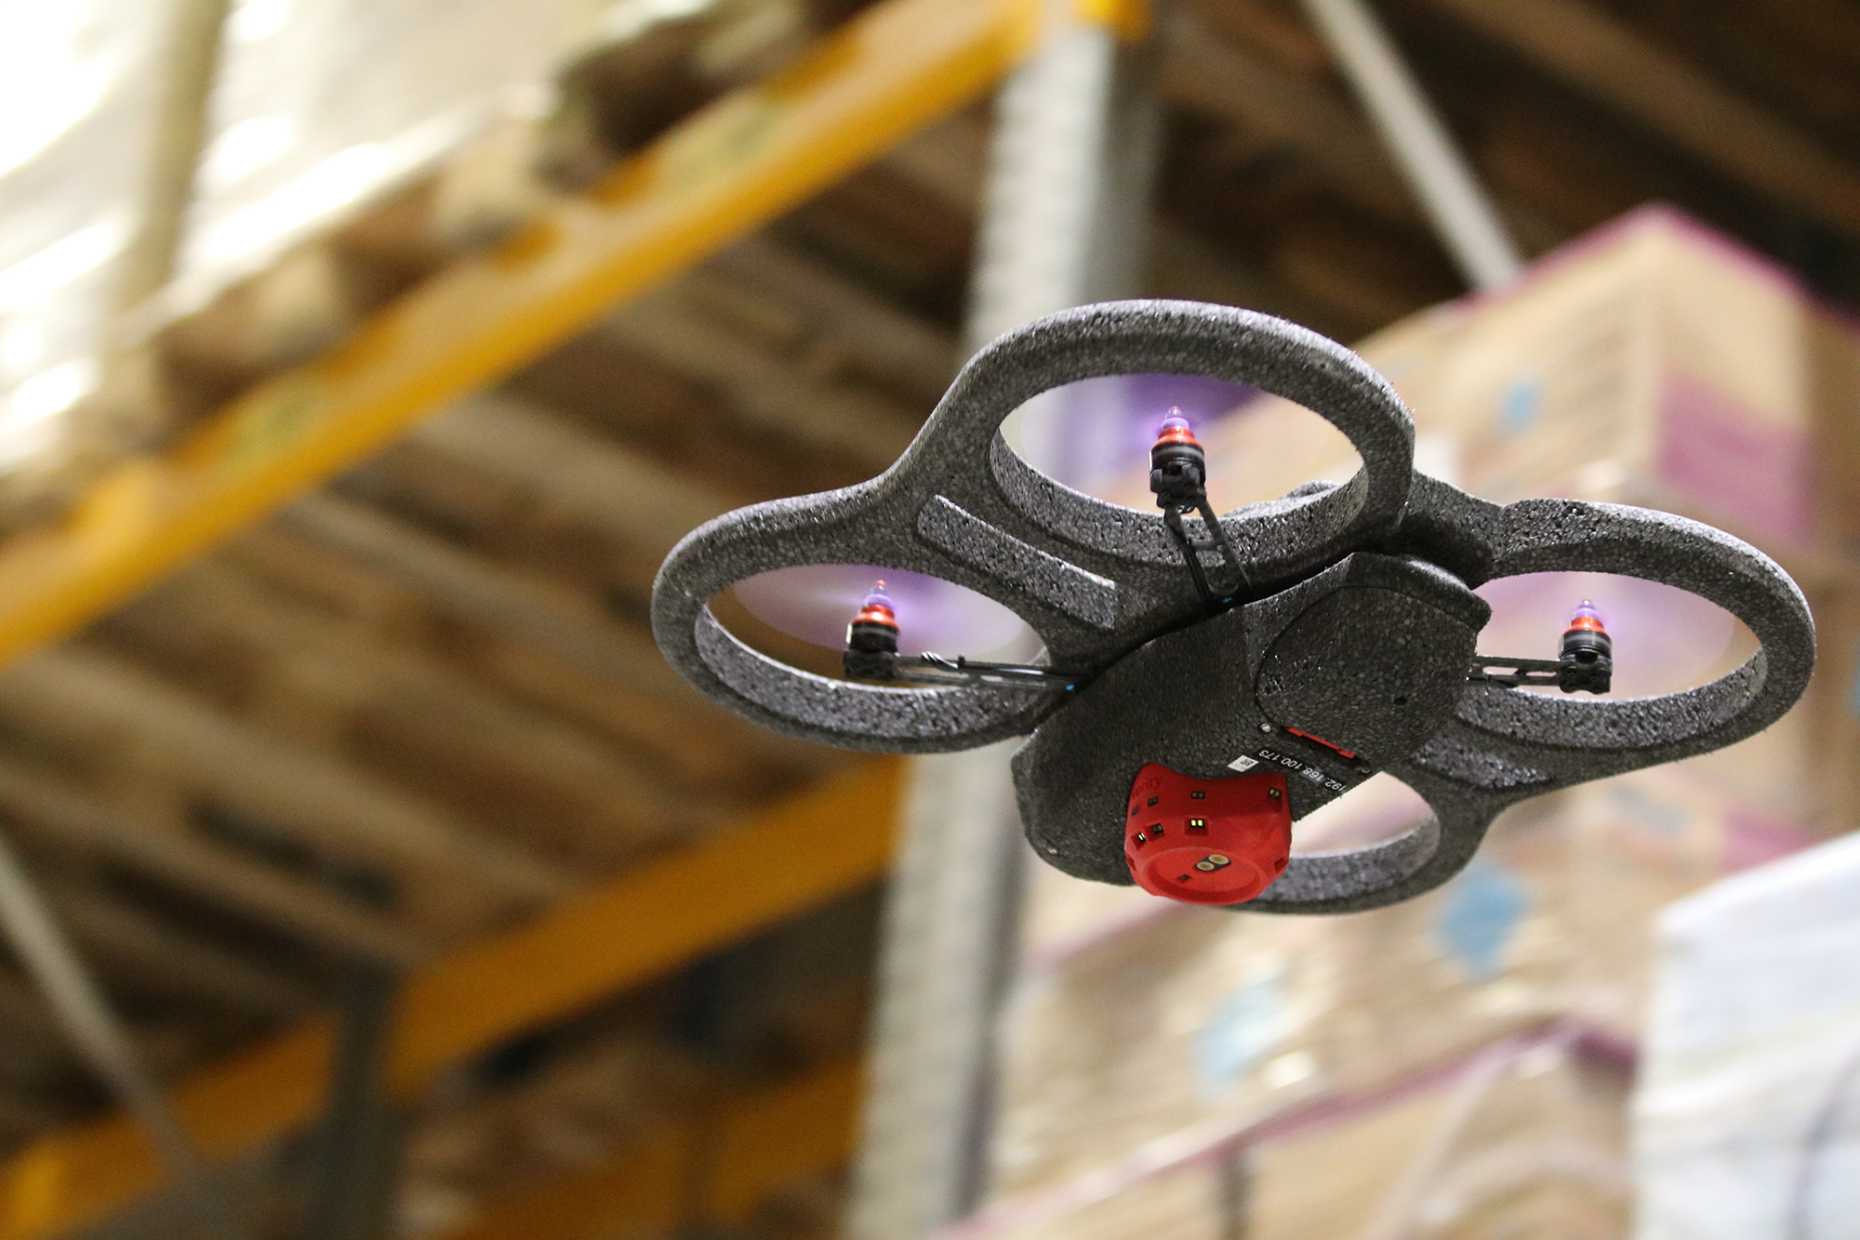 A Verity drone flying in a warehouse